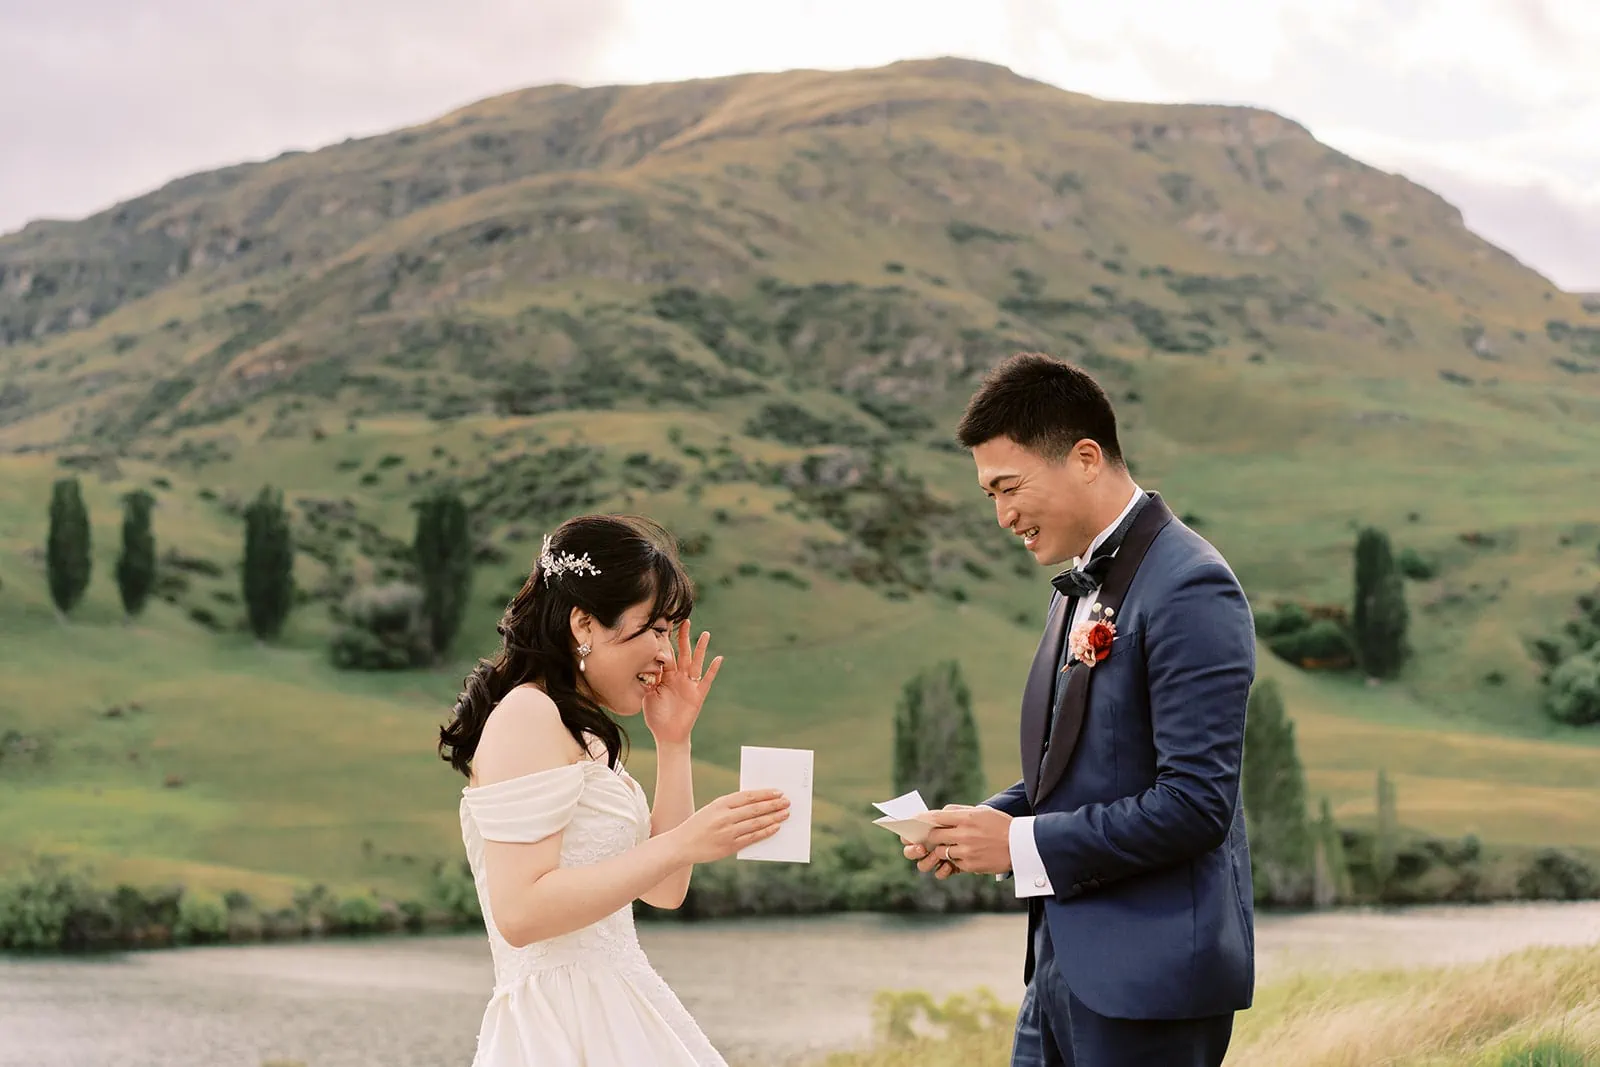 Queenstown Elopement Heli Wedding Photographer クイーンズタウン結婚式 | Pre-wedding photoshoot of a bride and groom in front of a picturesque lake nestled amidst majestic mountains.